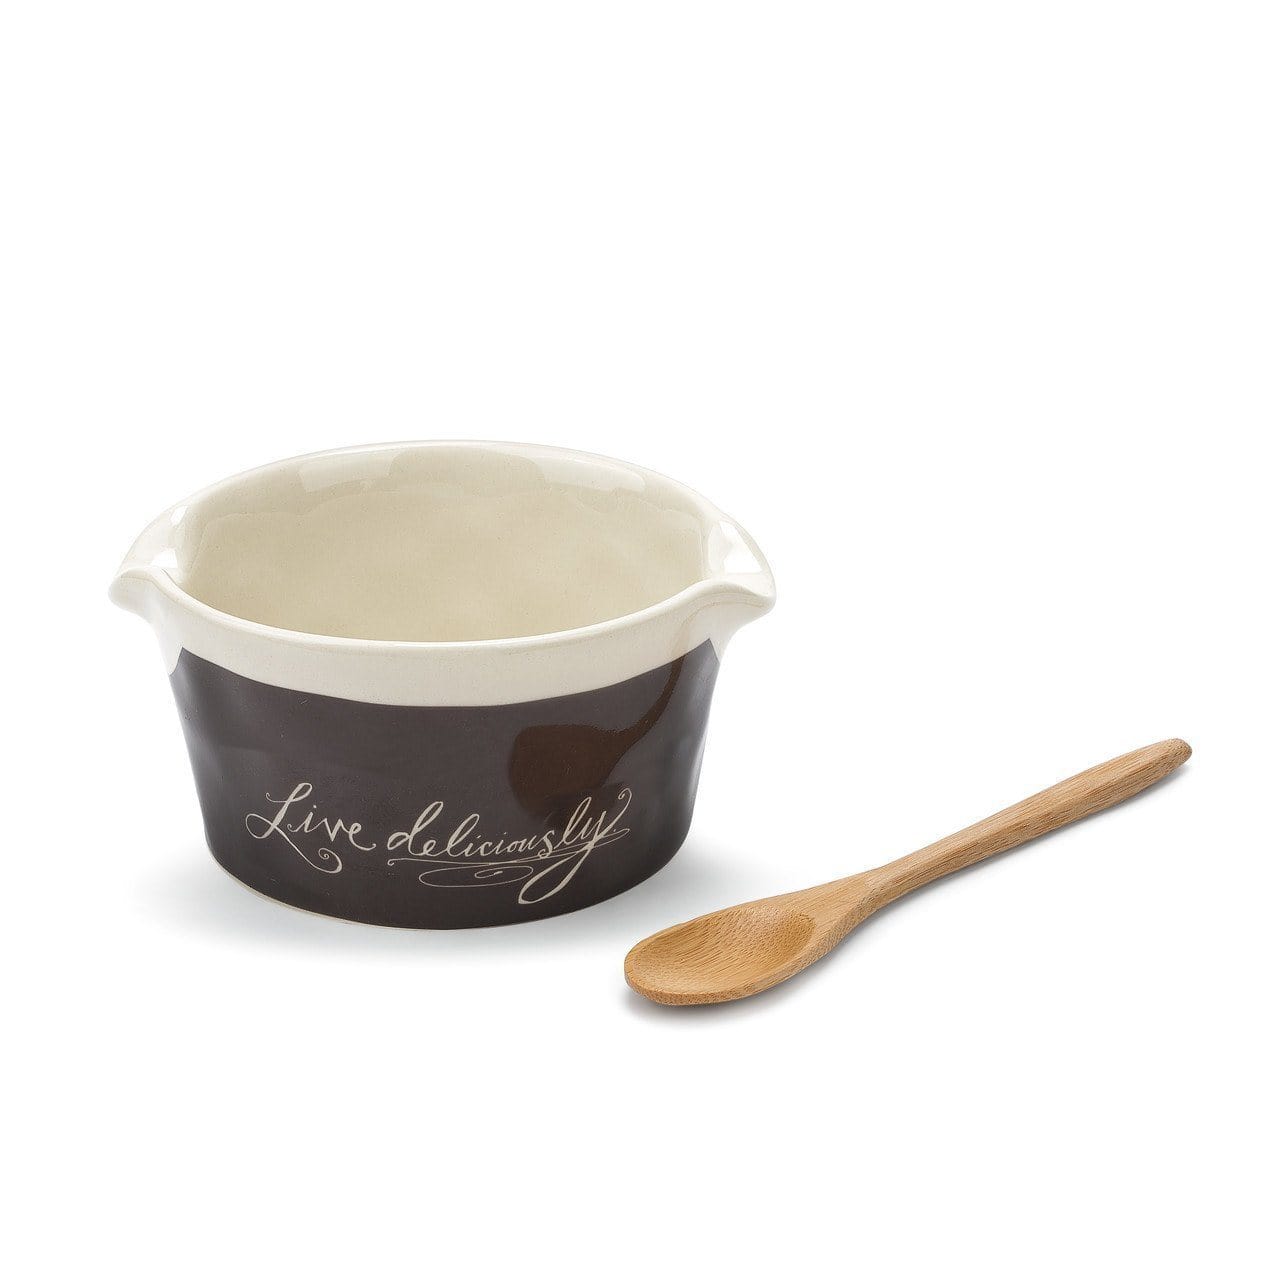 Live Deliciously Appetizer Bowl with Spoon or Spoon Rest - The Pink Pigs, Animal Lover's Boutique